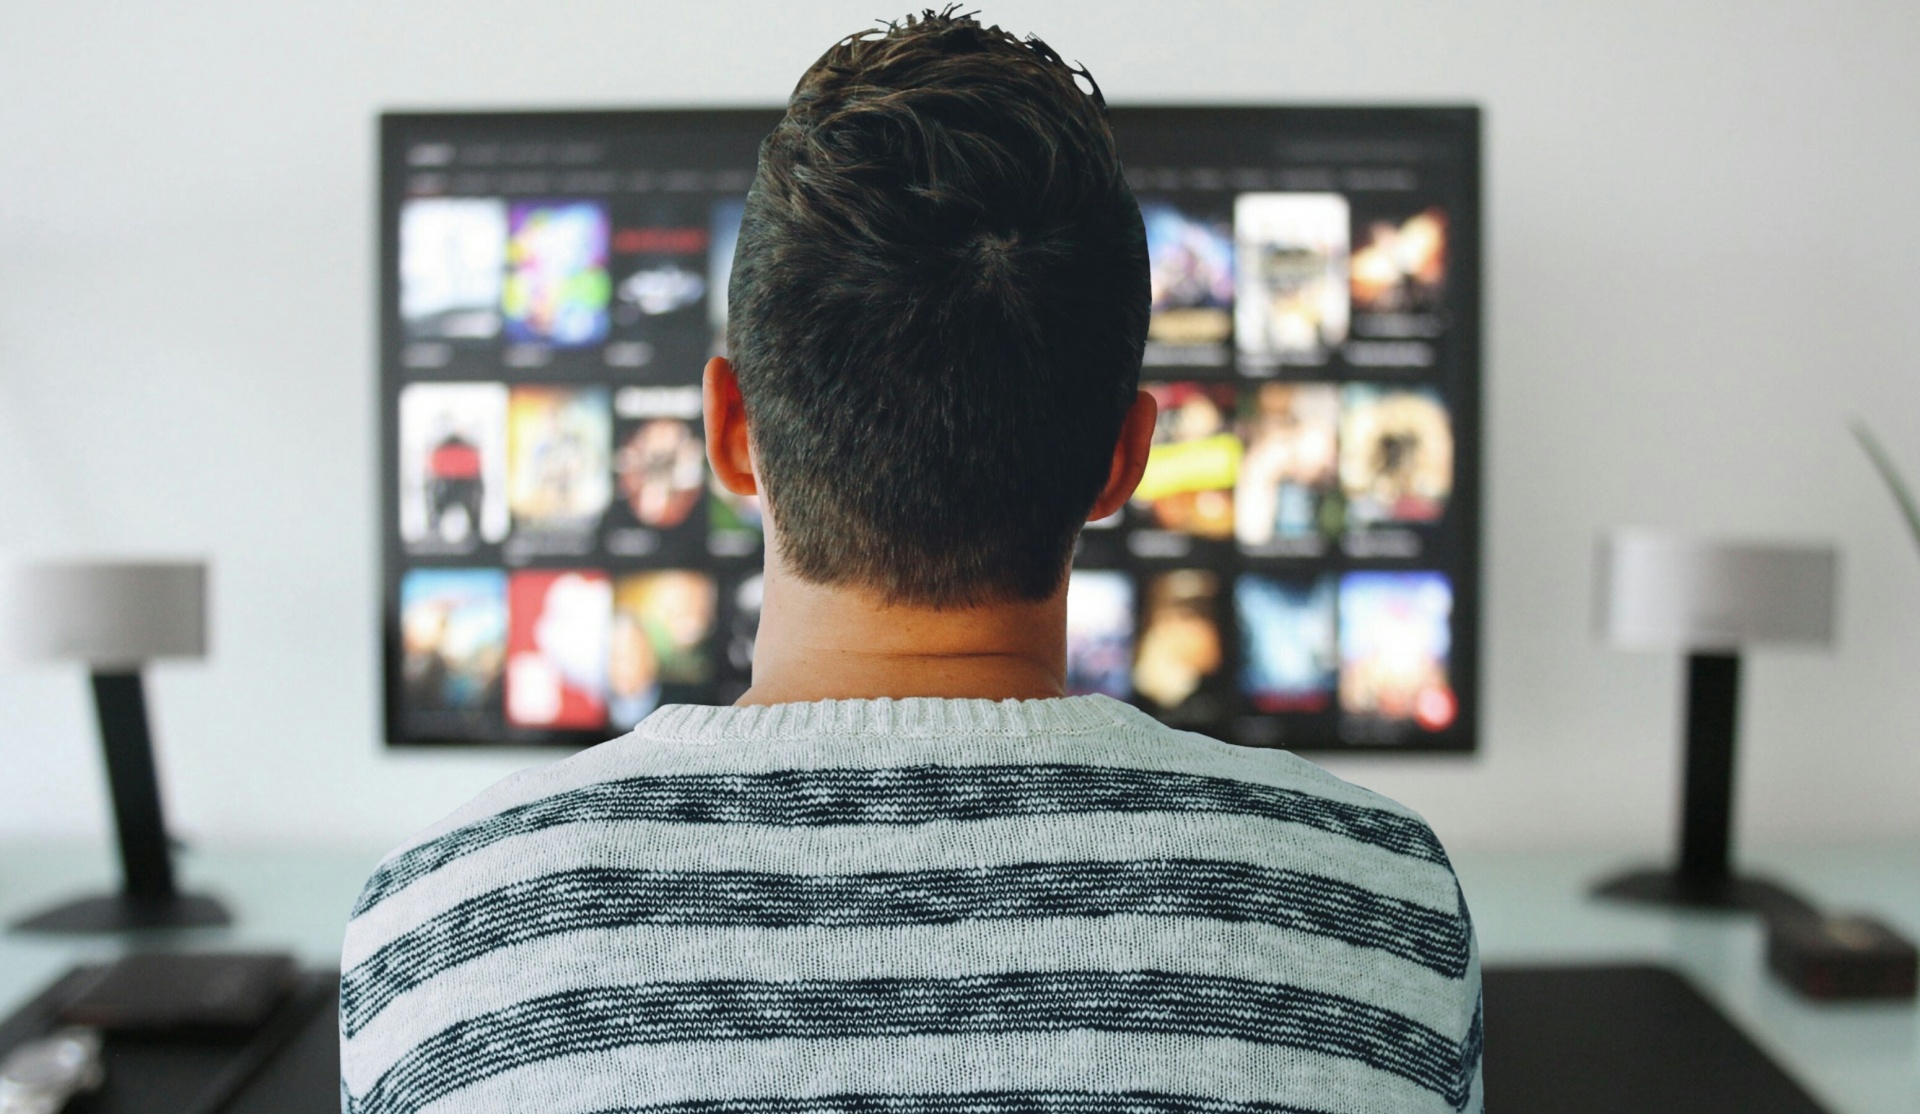 Back of man's head as he looks at a TV screen with many watching options to choose from